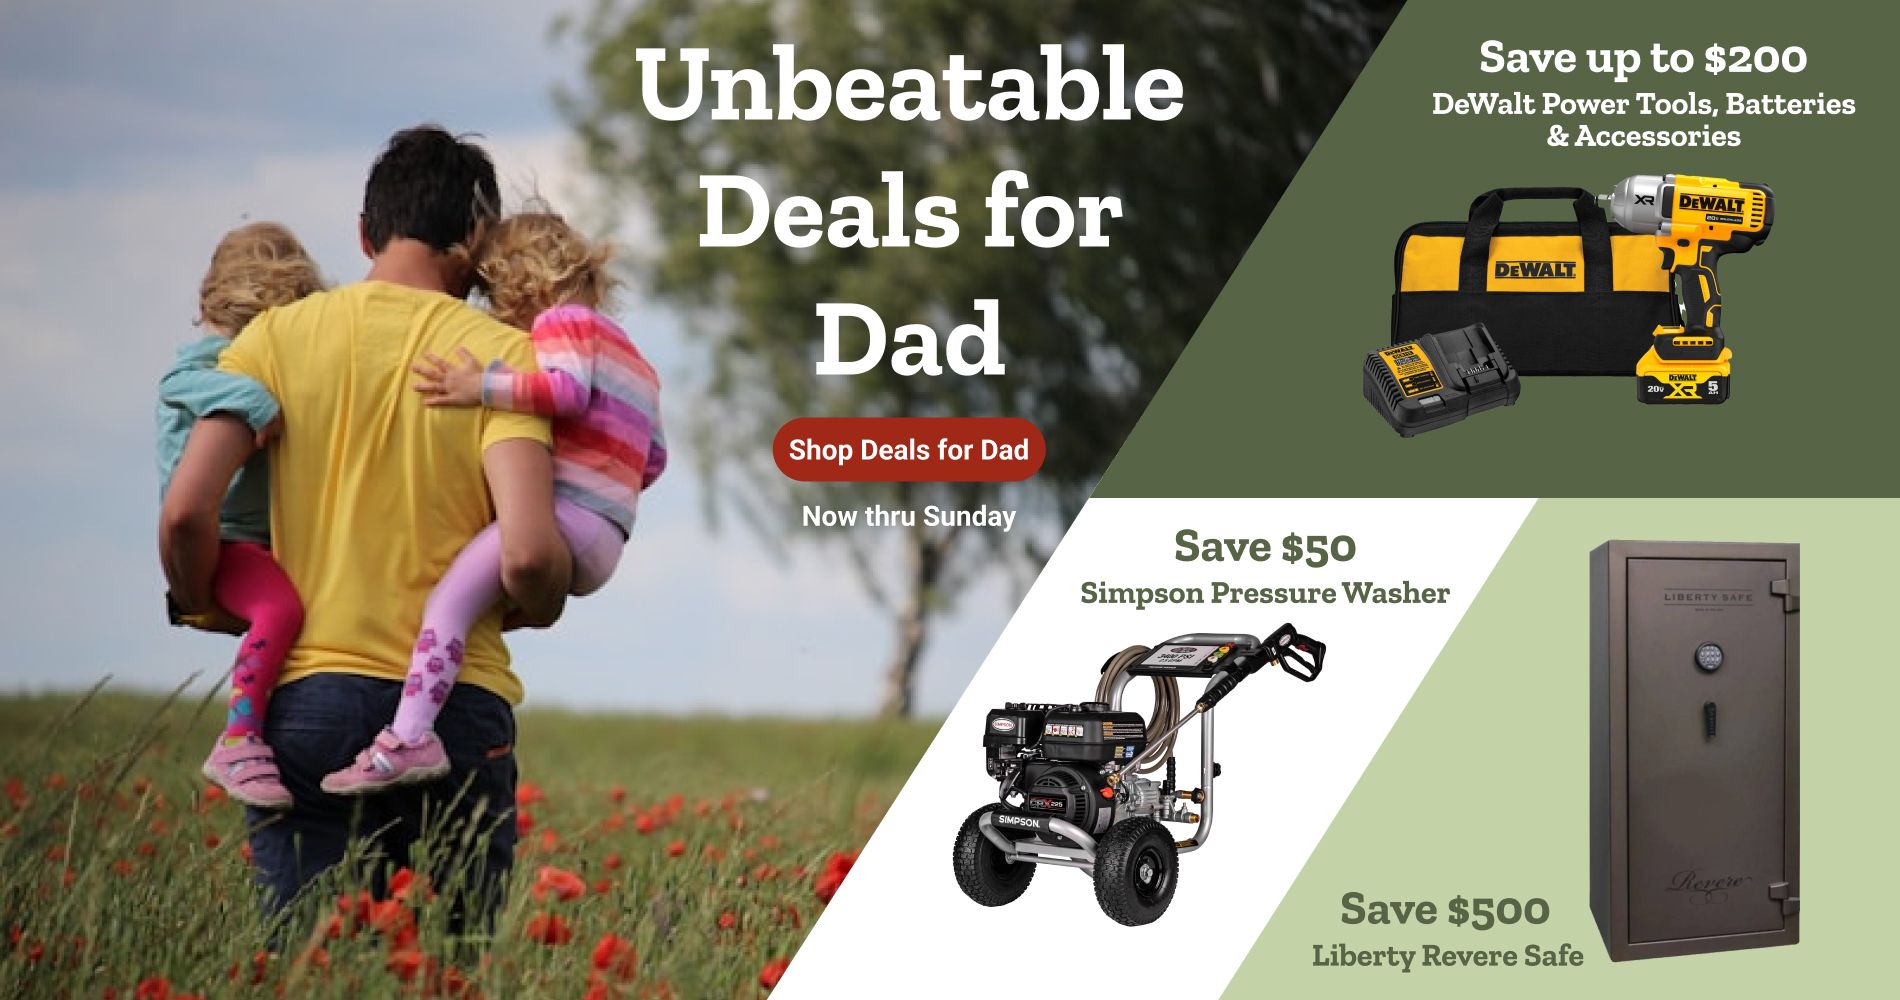 Unbeatable Deals for Dad. Now thru Sunday. Savings up to $500 Off Safes, UTVs, and more. Shop Now.